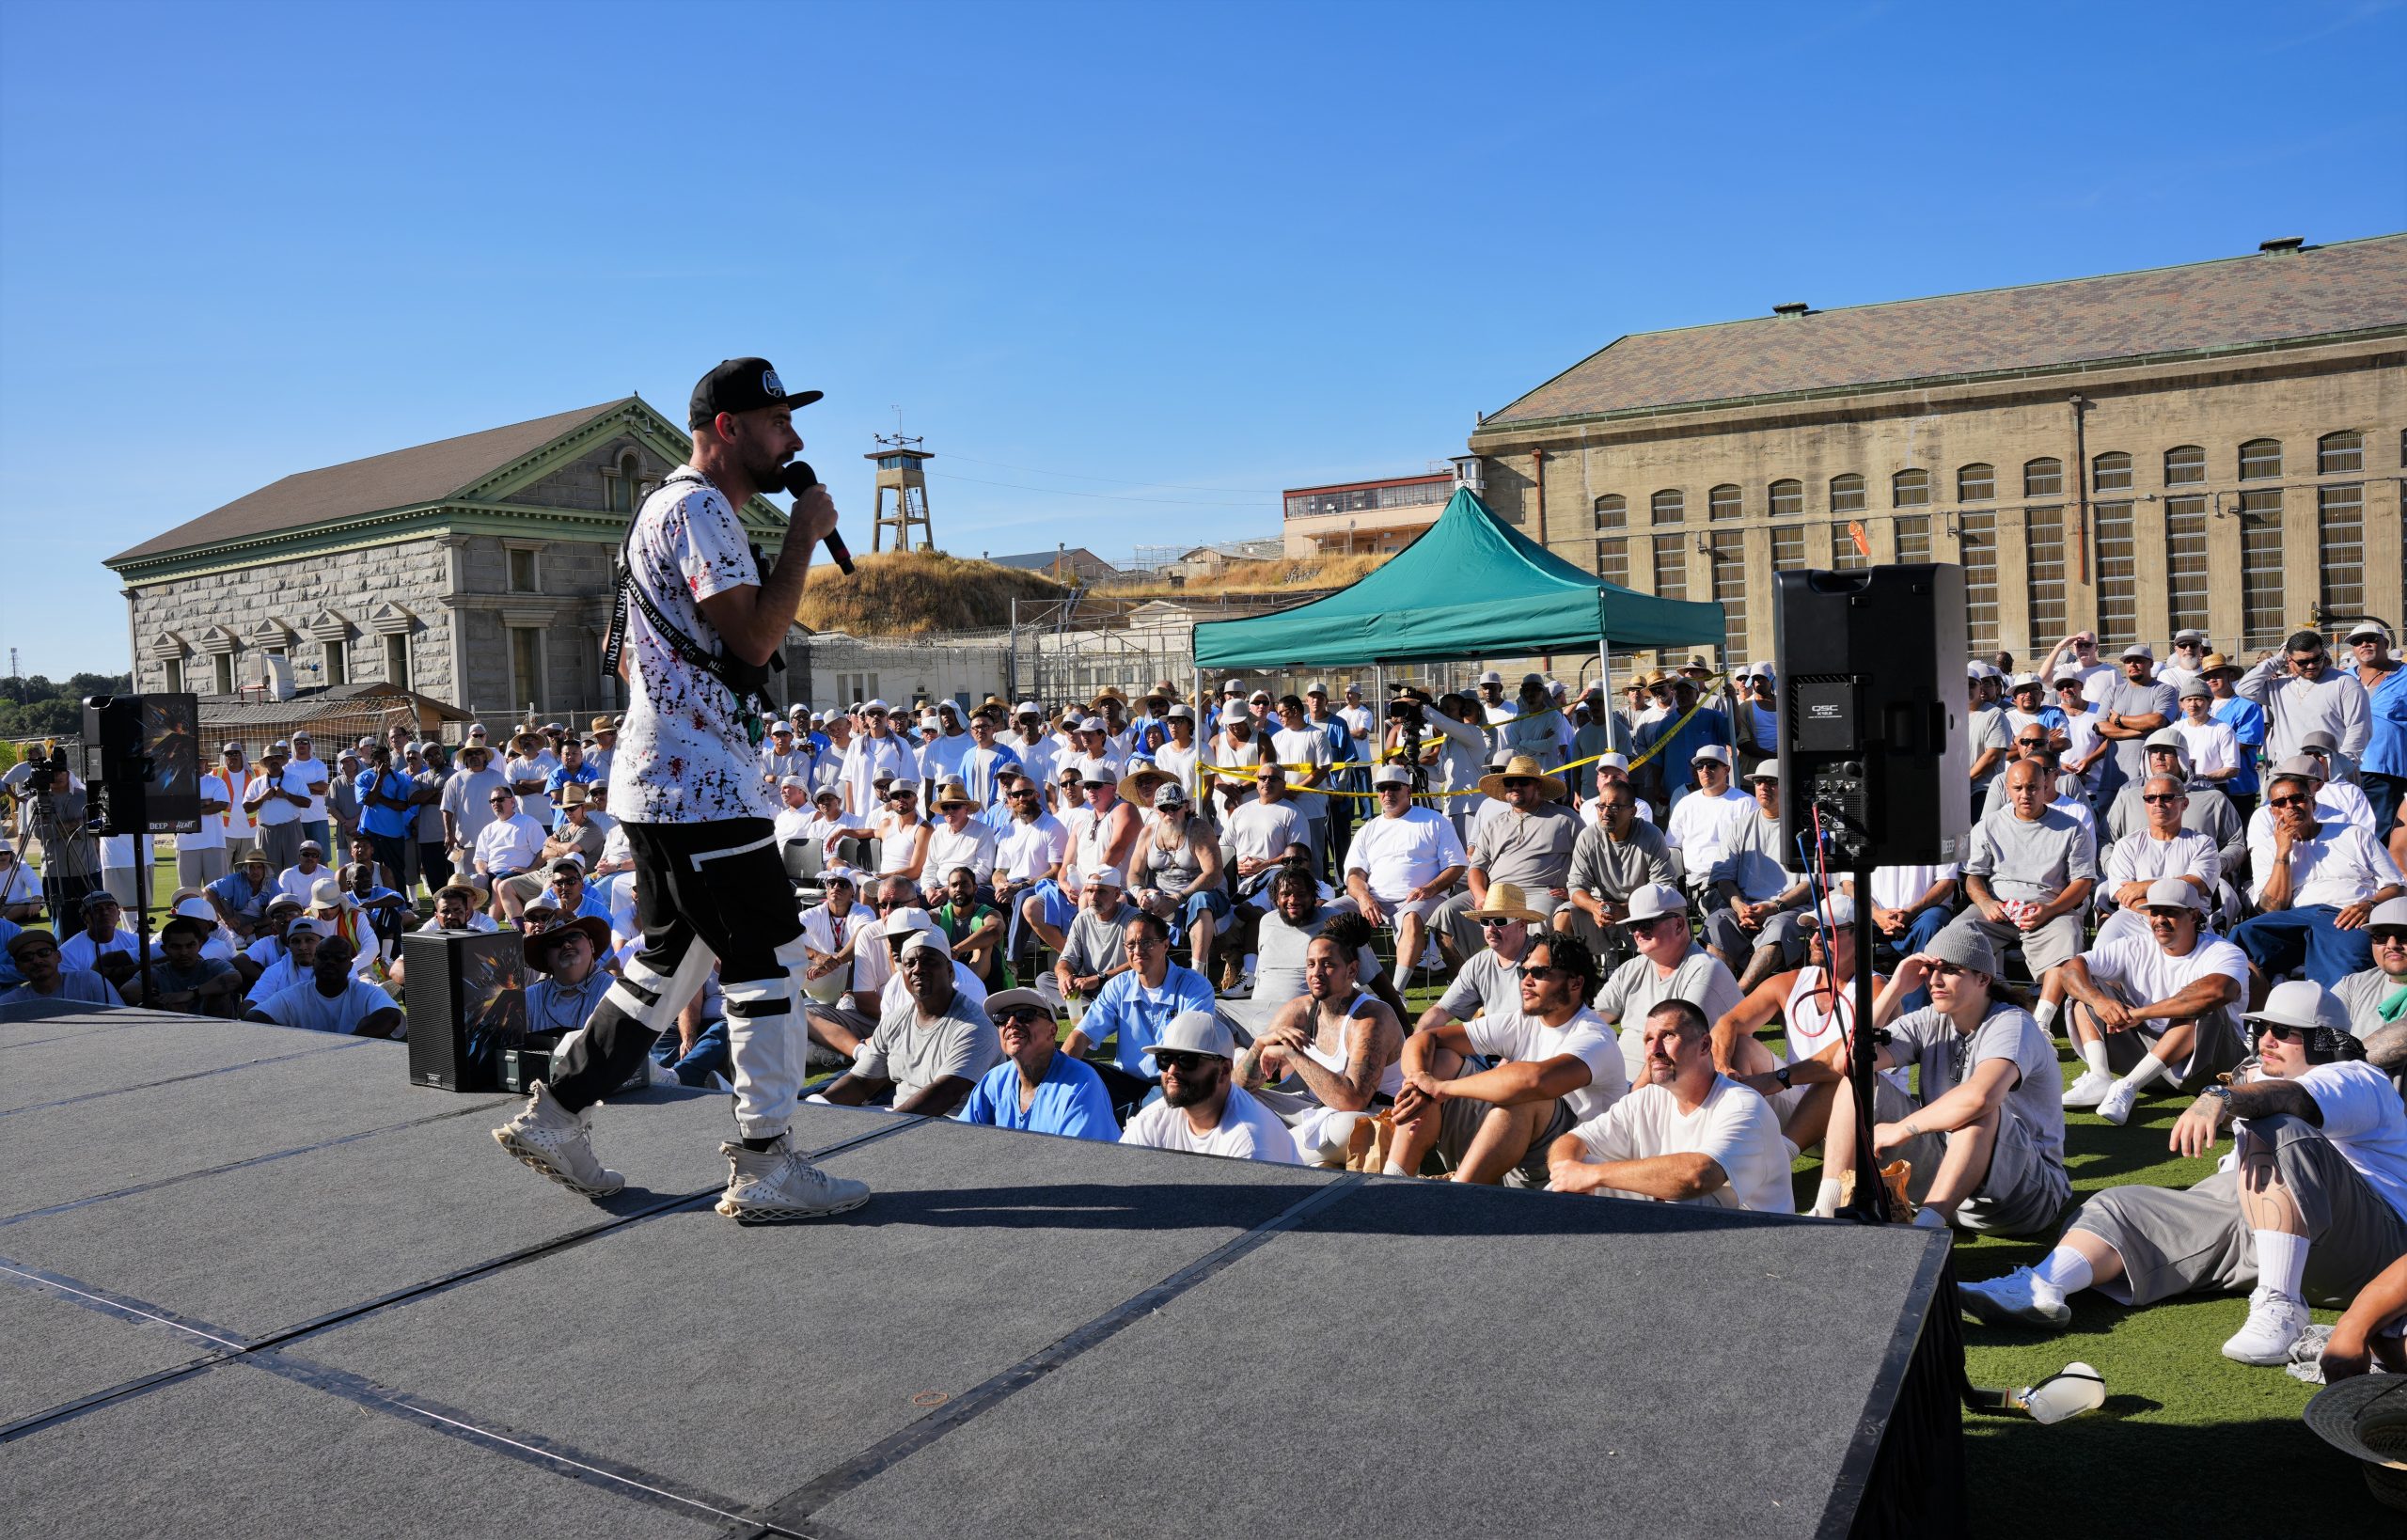 A man performs on a stage in front of an audience at Folsom State Prison (FSP) as part of Summer Palooza.